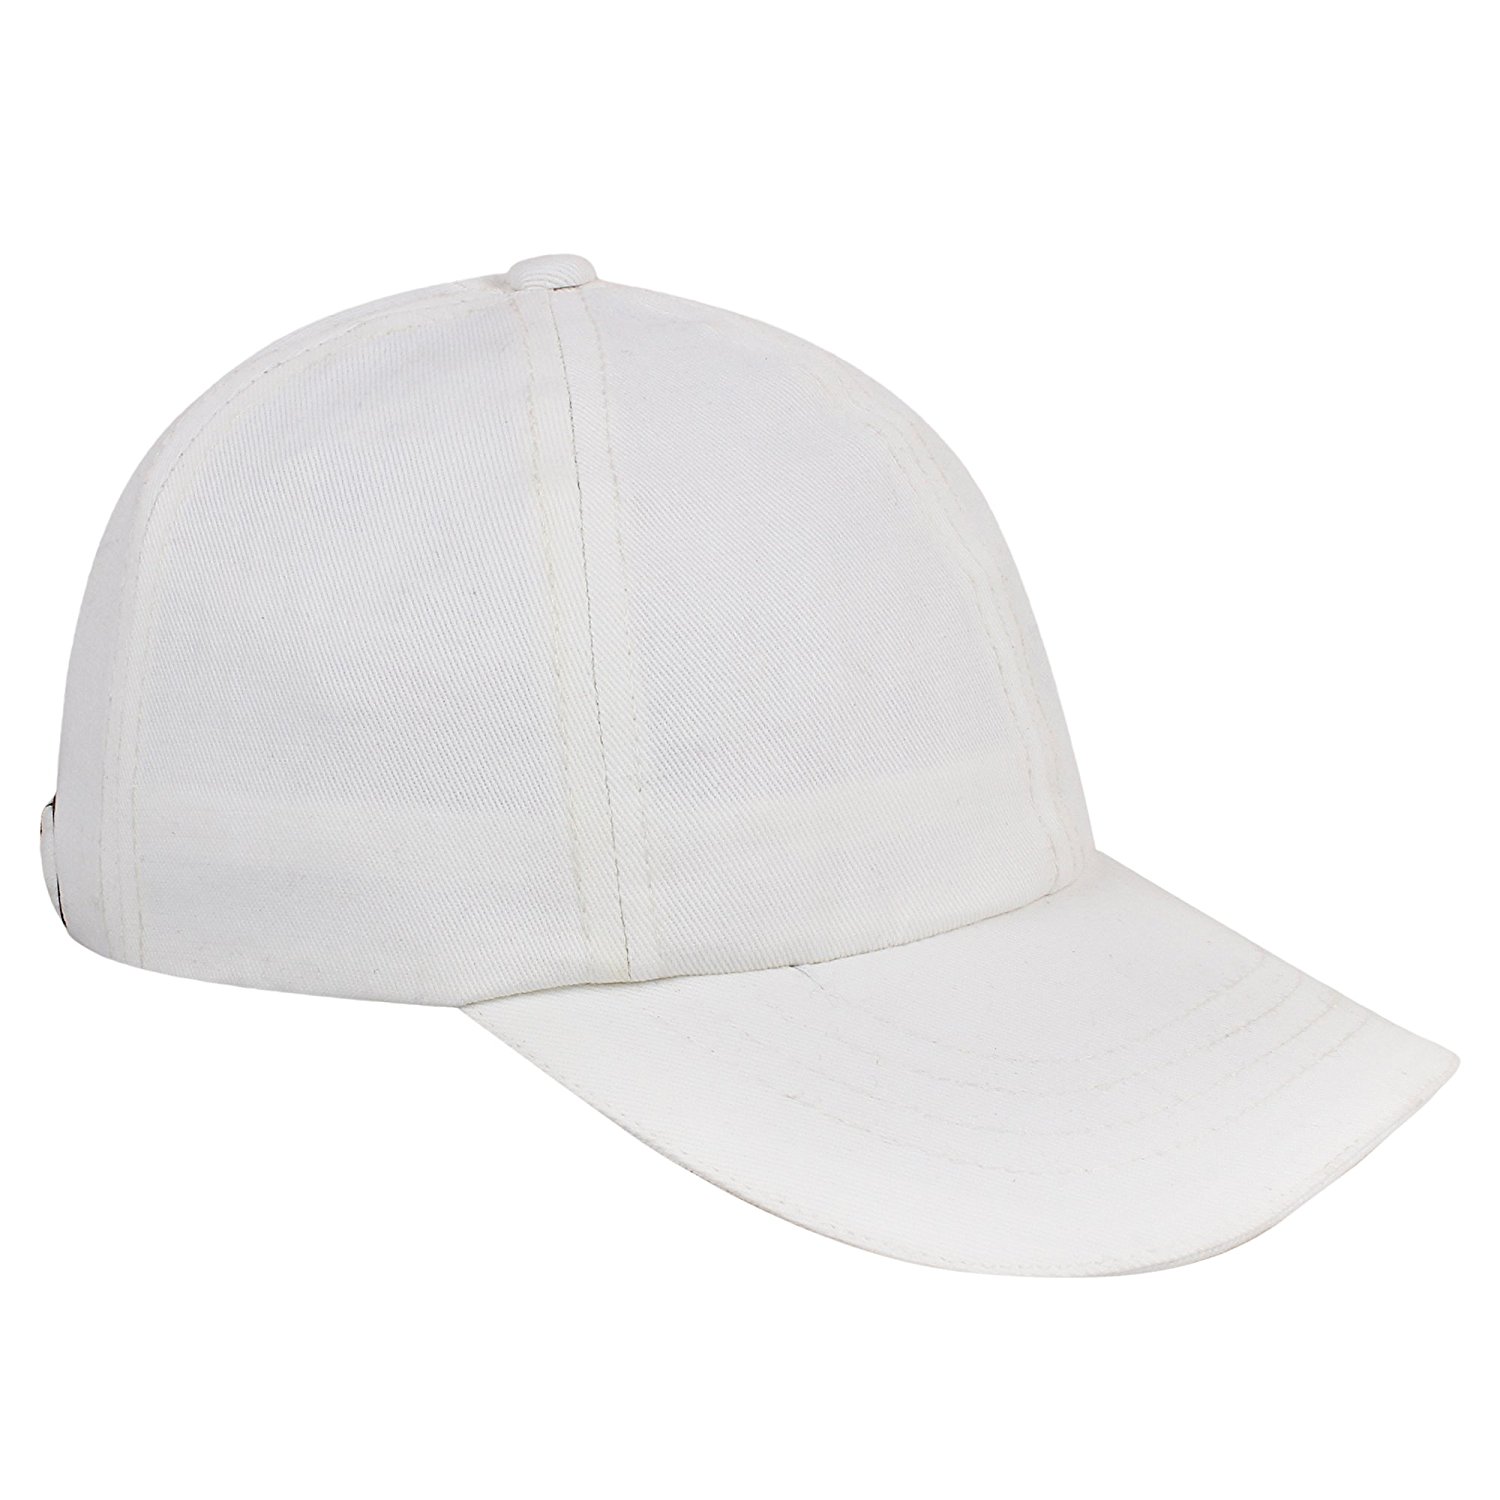 Buy Mens White Color Stylish Caps Online @ ₹350 from ShopClues